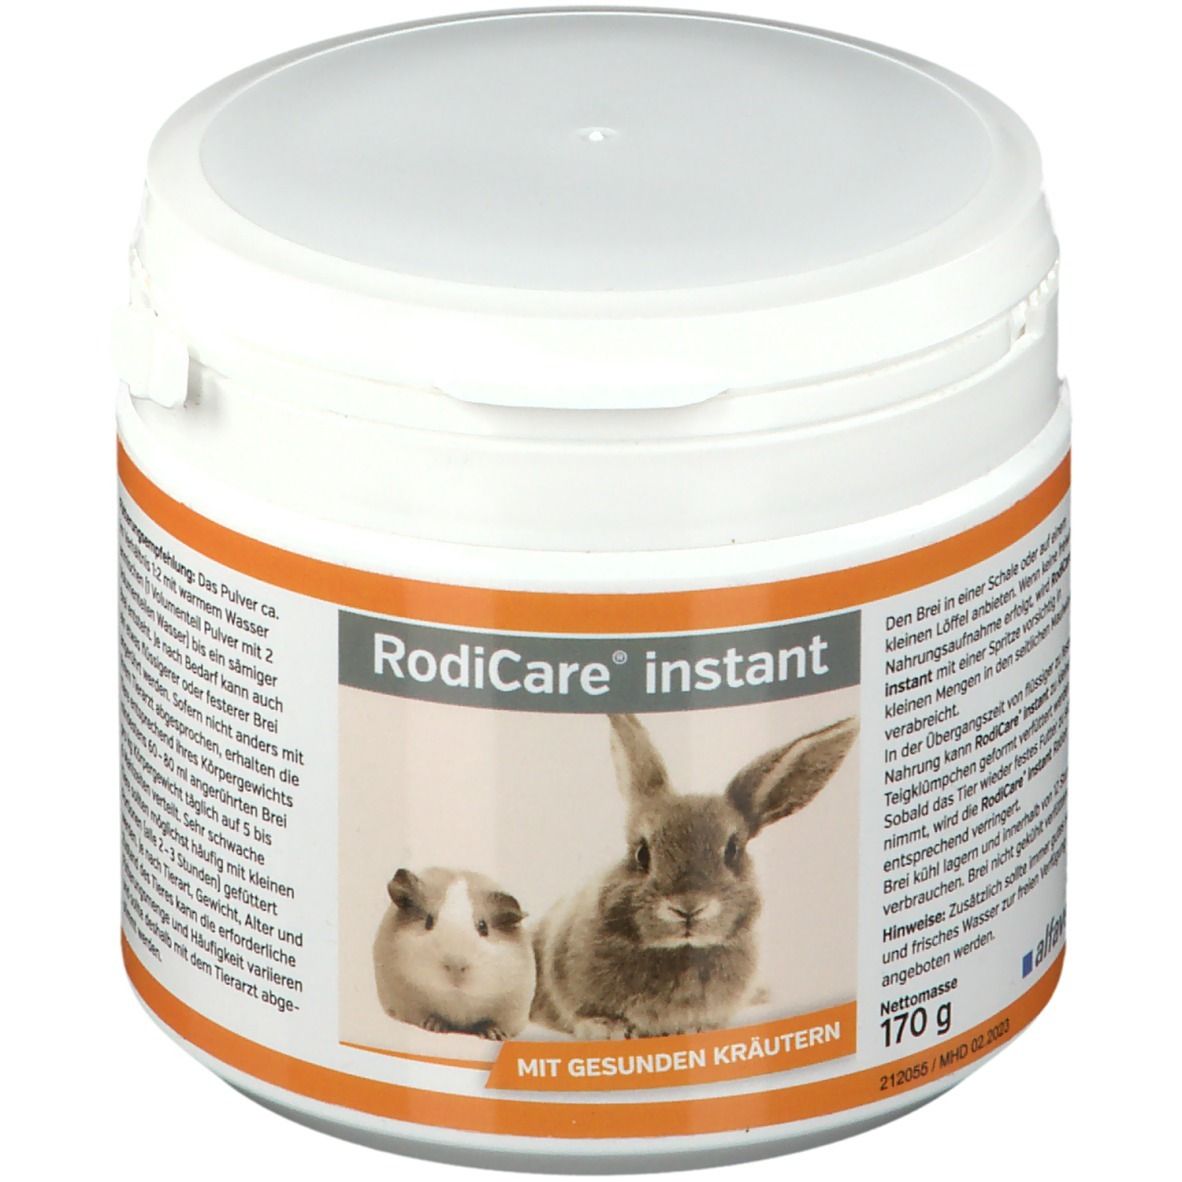 Image of RodiCare® instant